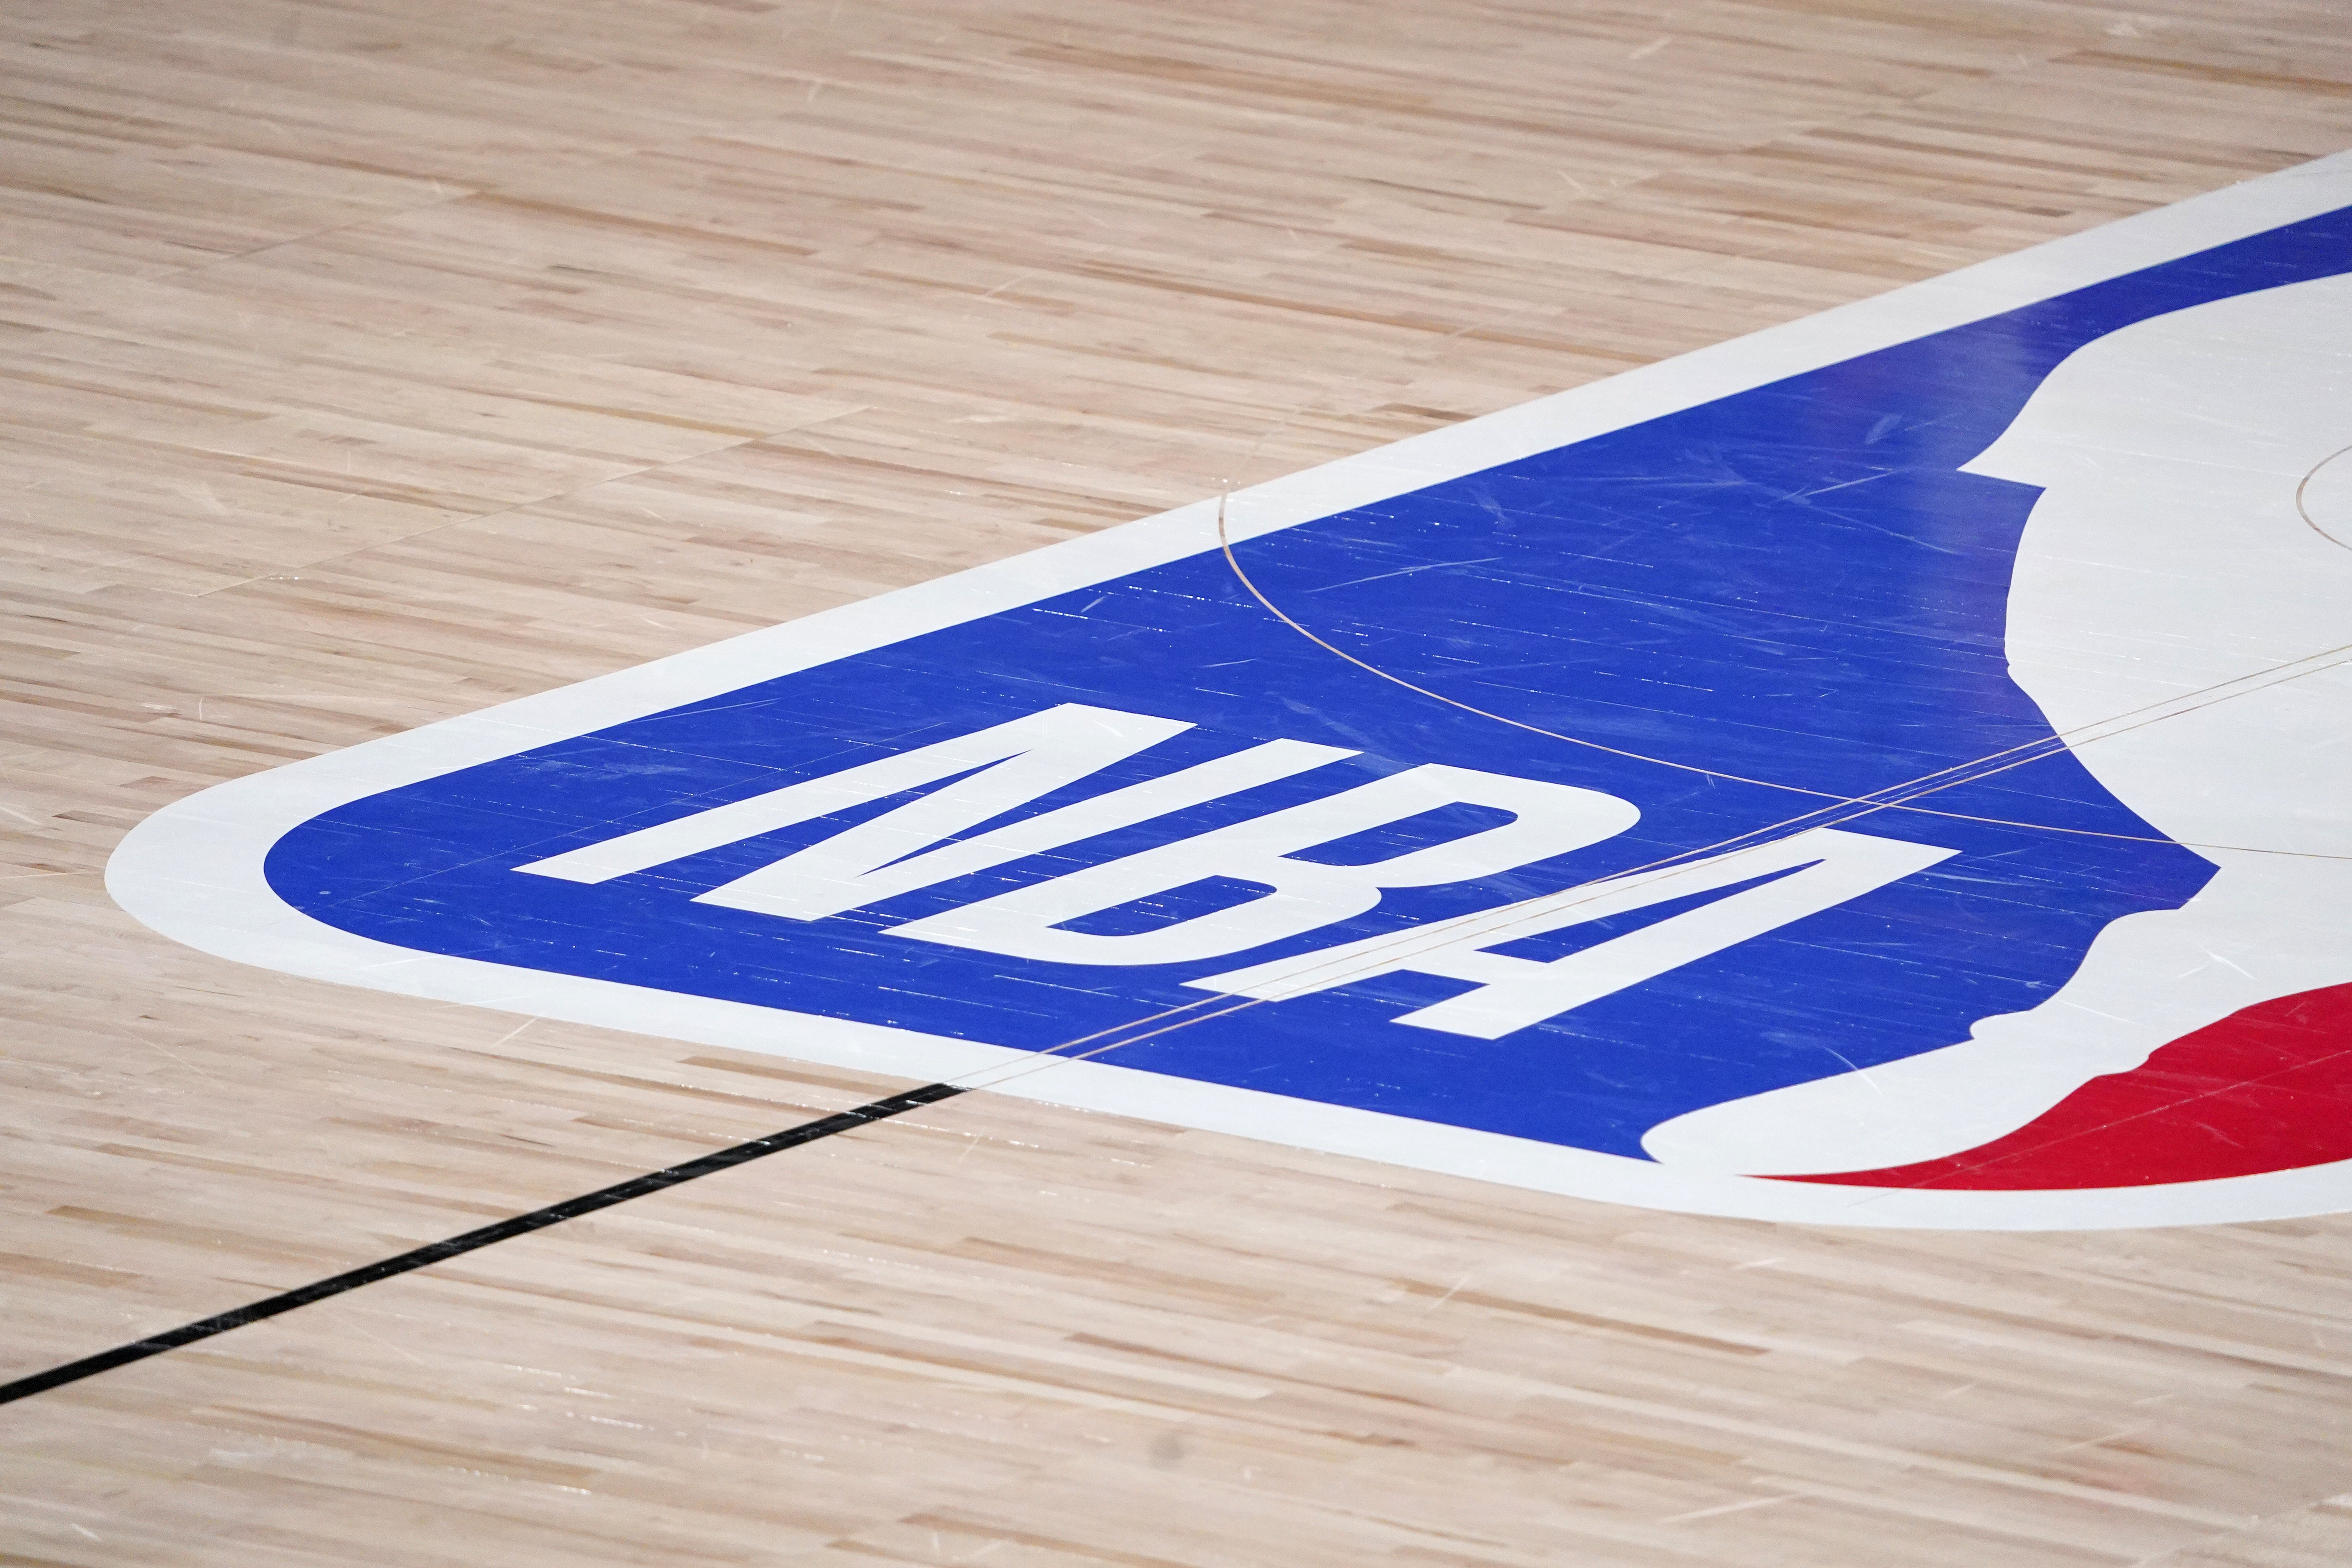 Nba Championship 2022 Schedule Nba Schedule 2022: Regular Season, Playoffs, Finals And Key Dates  Reportedly Revealed | Bleacher Report | Latest News, Videos And Highlights